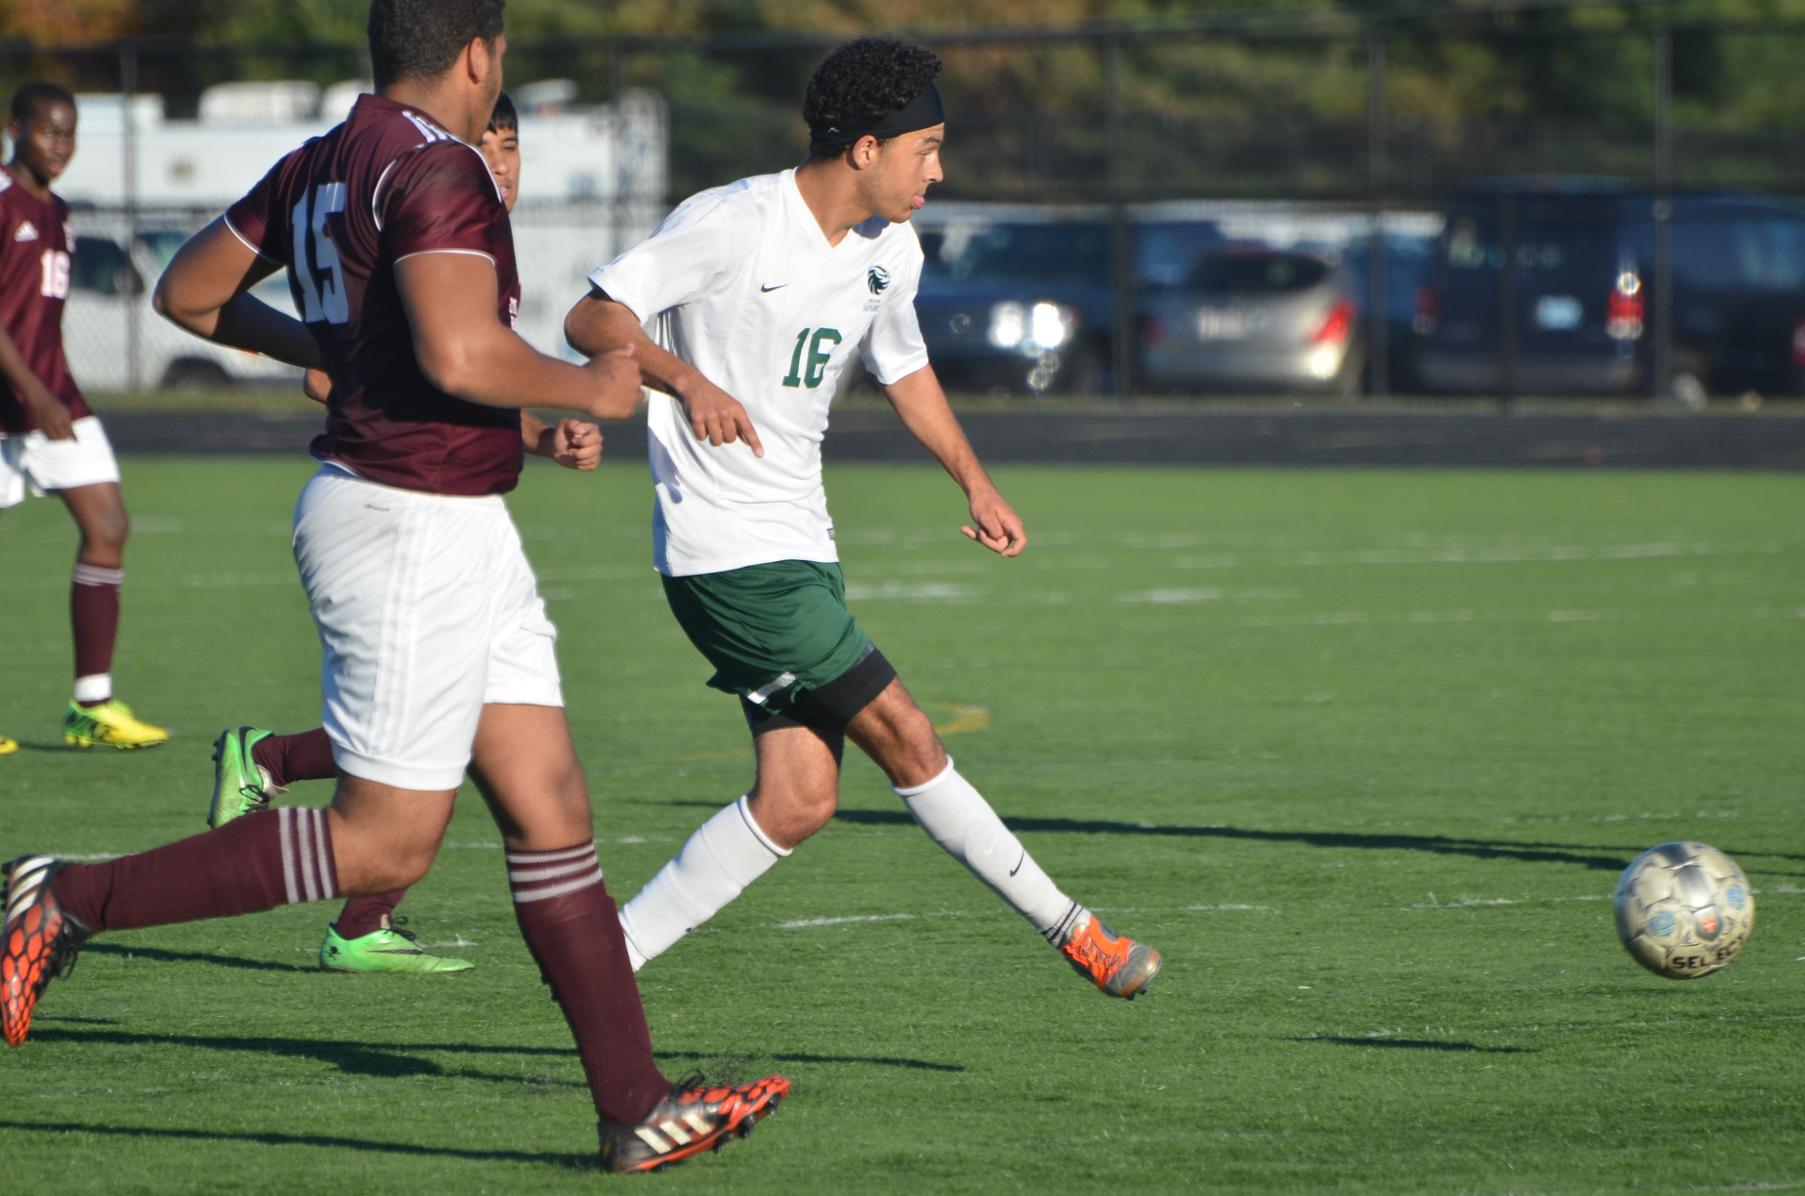 Andrade Leads Men's Soccer Team To Victory Over Ben Franklin